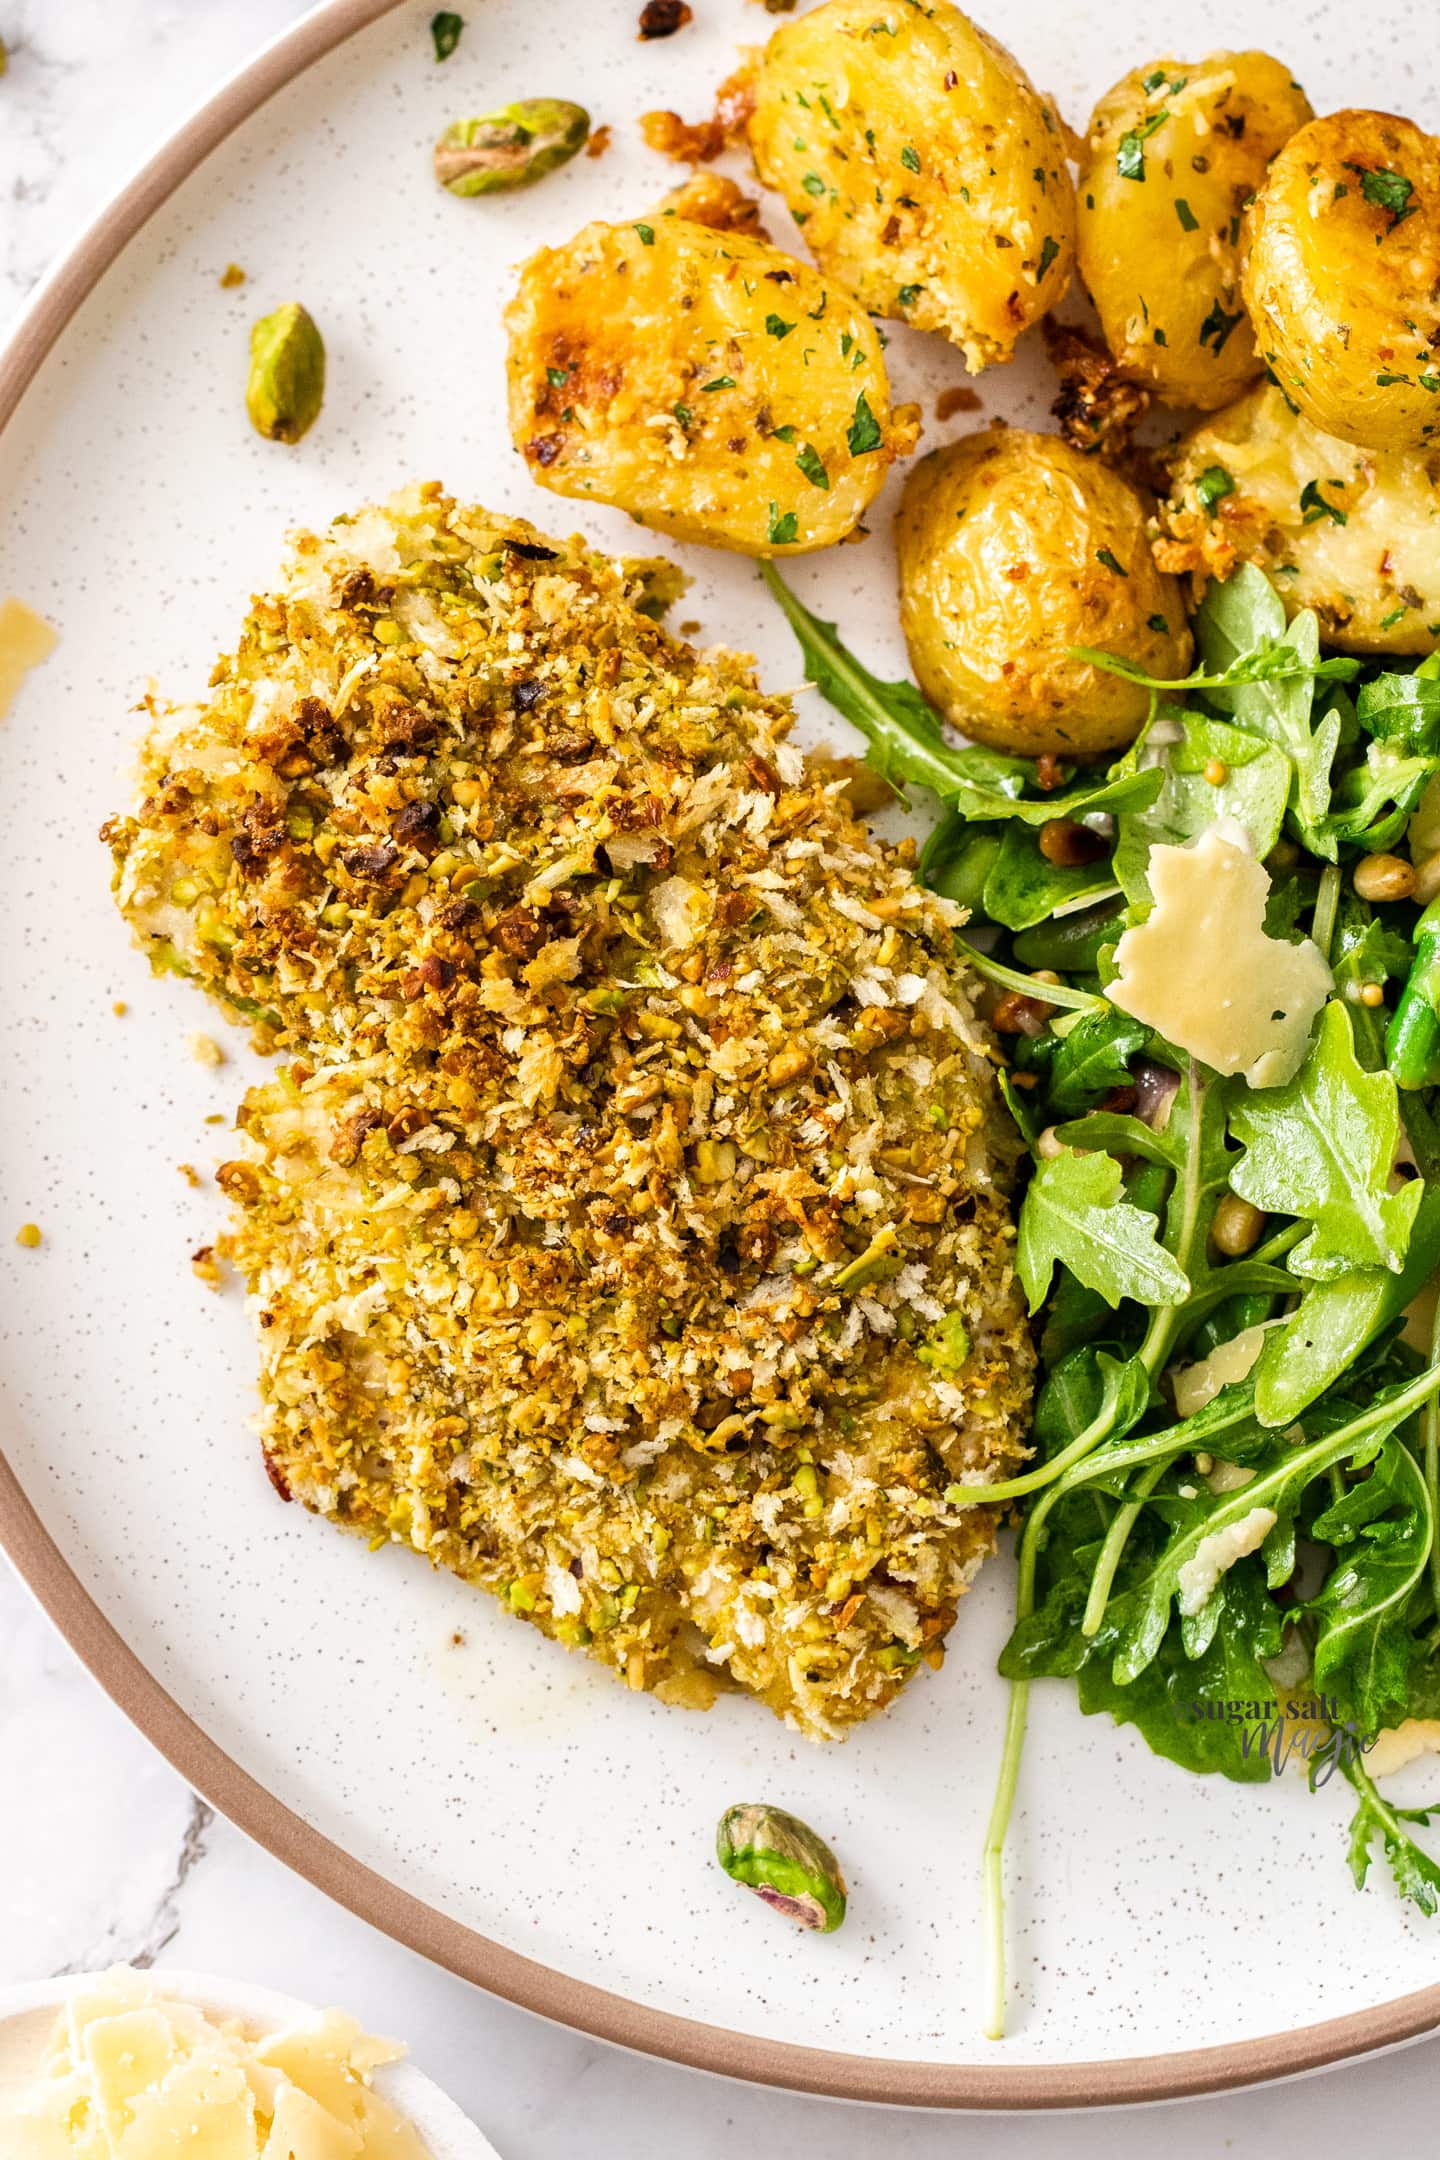 Closeup of pistachio crusted chicken breast next to potatoes and salad.